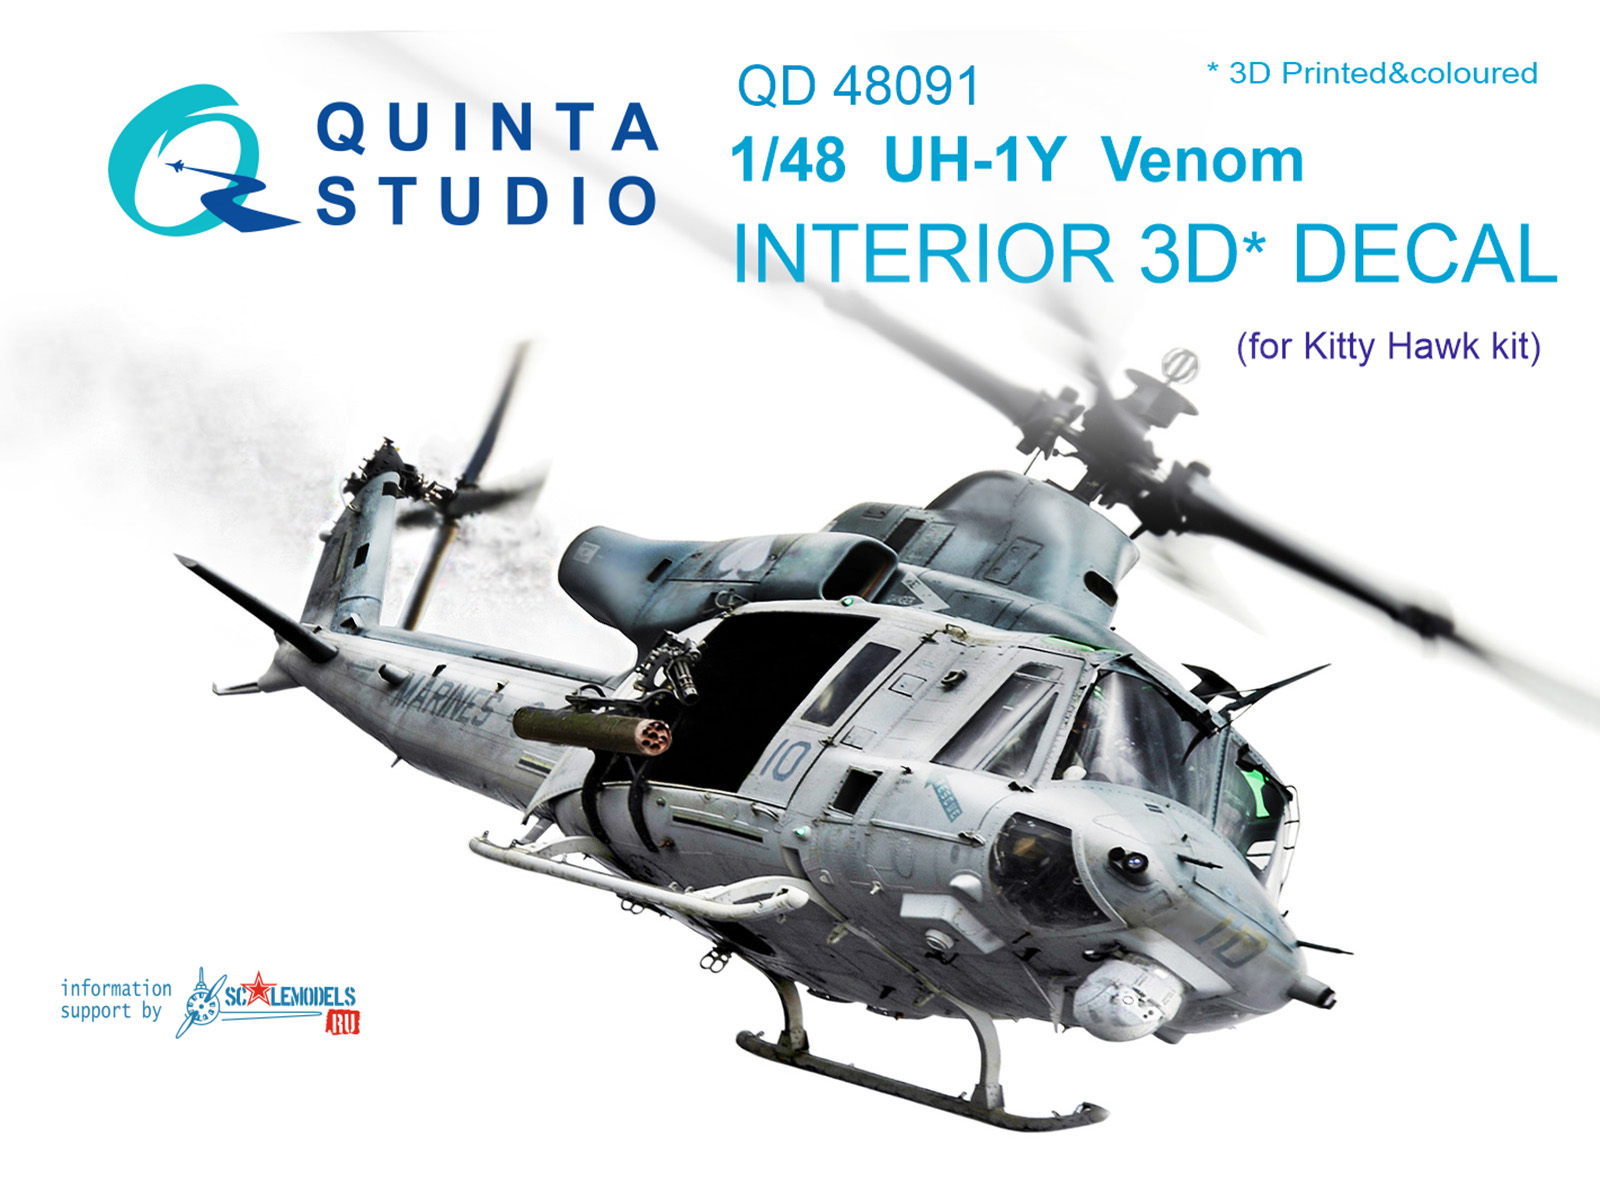  UH-1Y Venom 3D-Printed & coloured Interior on decal paper (for Kitty Hawk  kit)